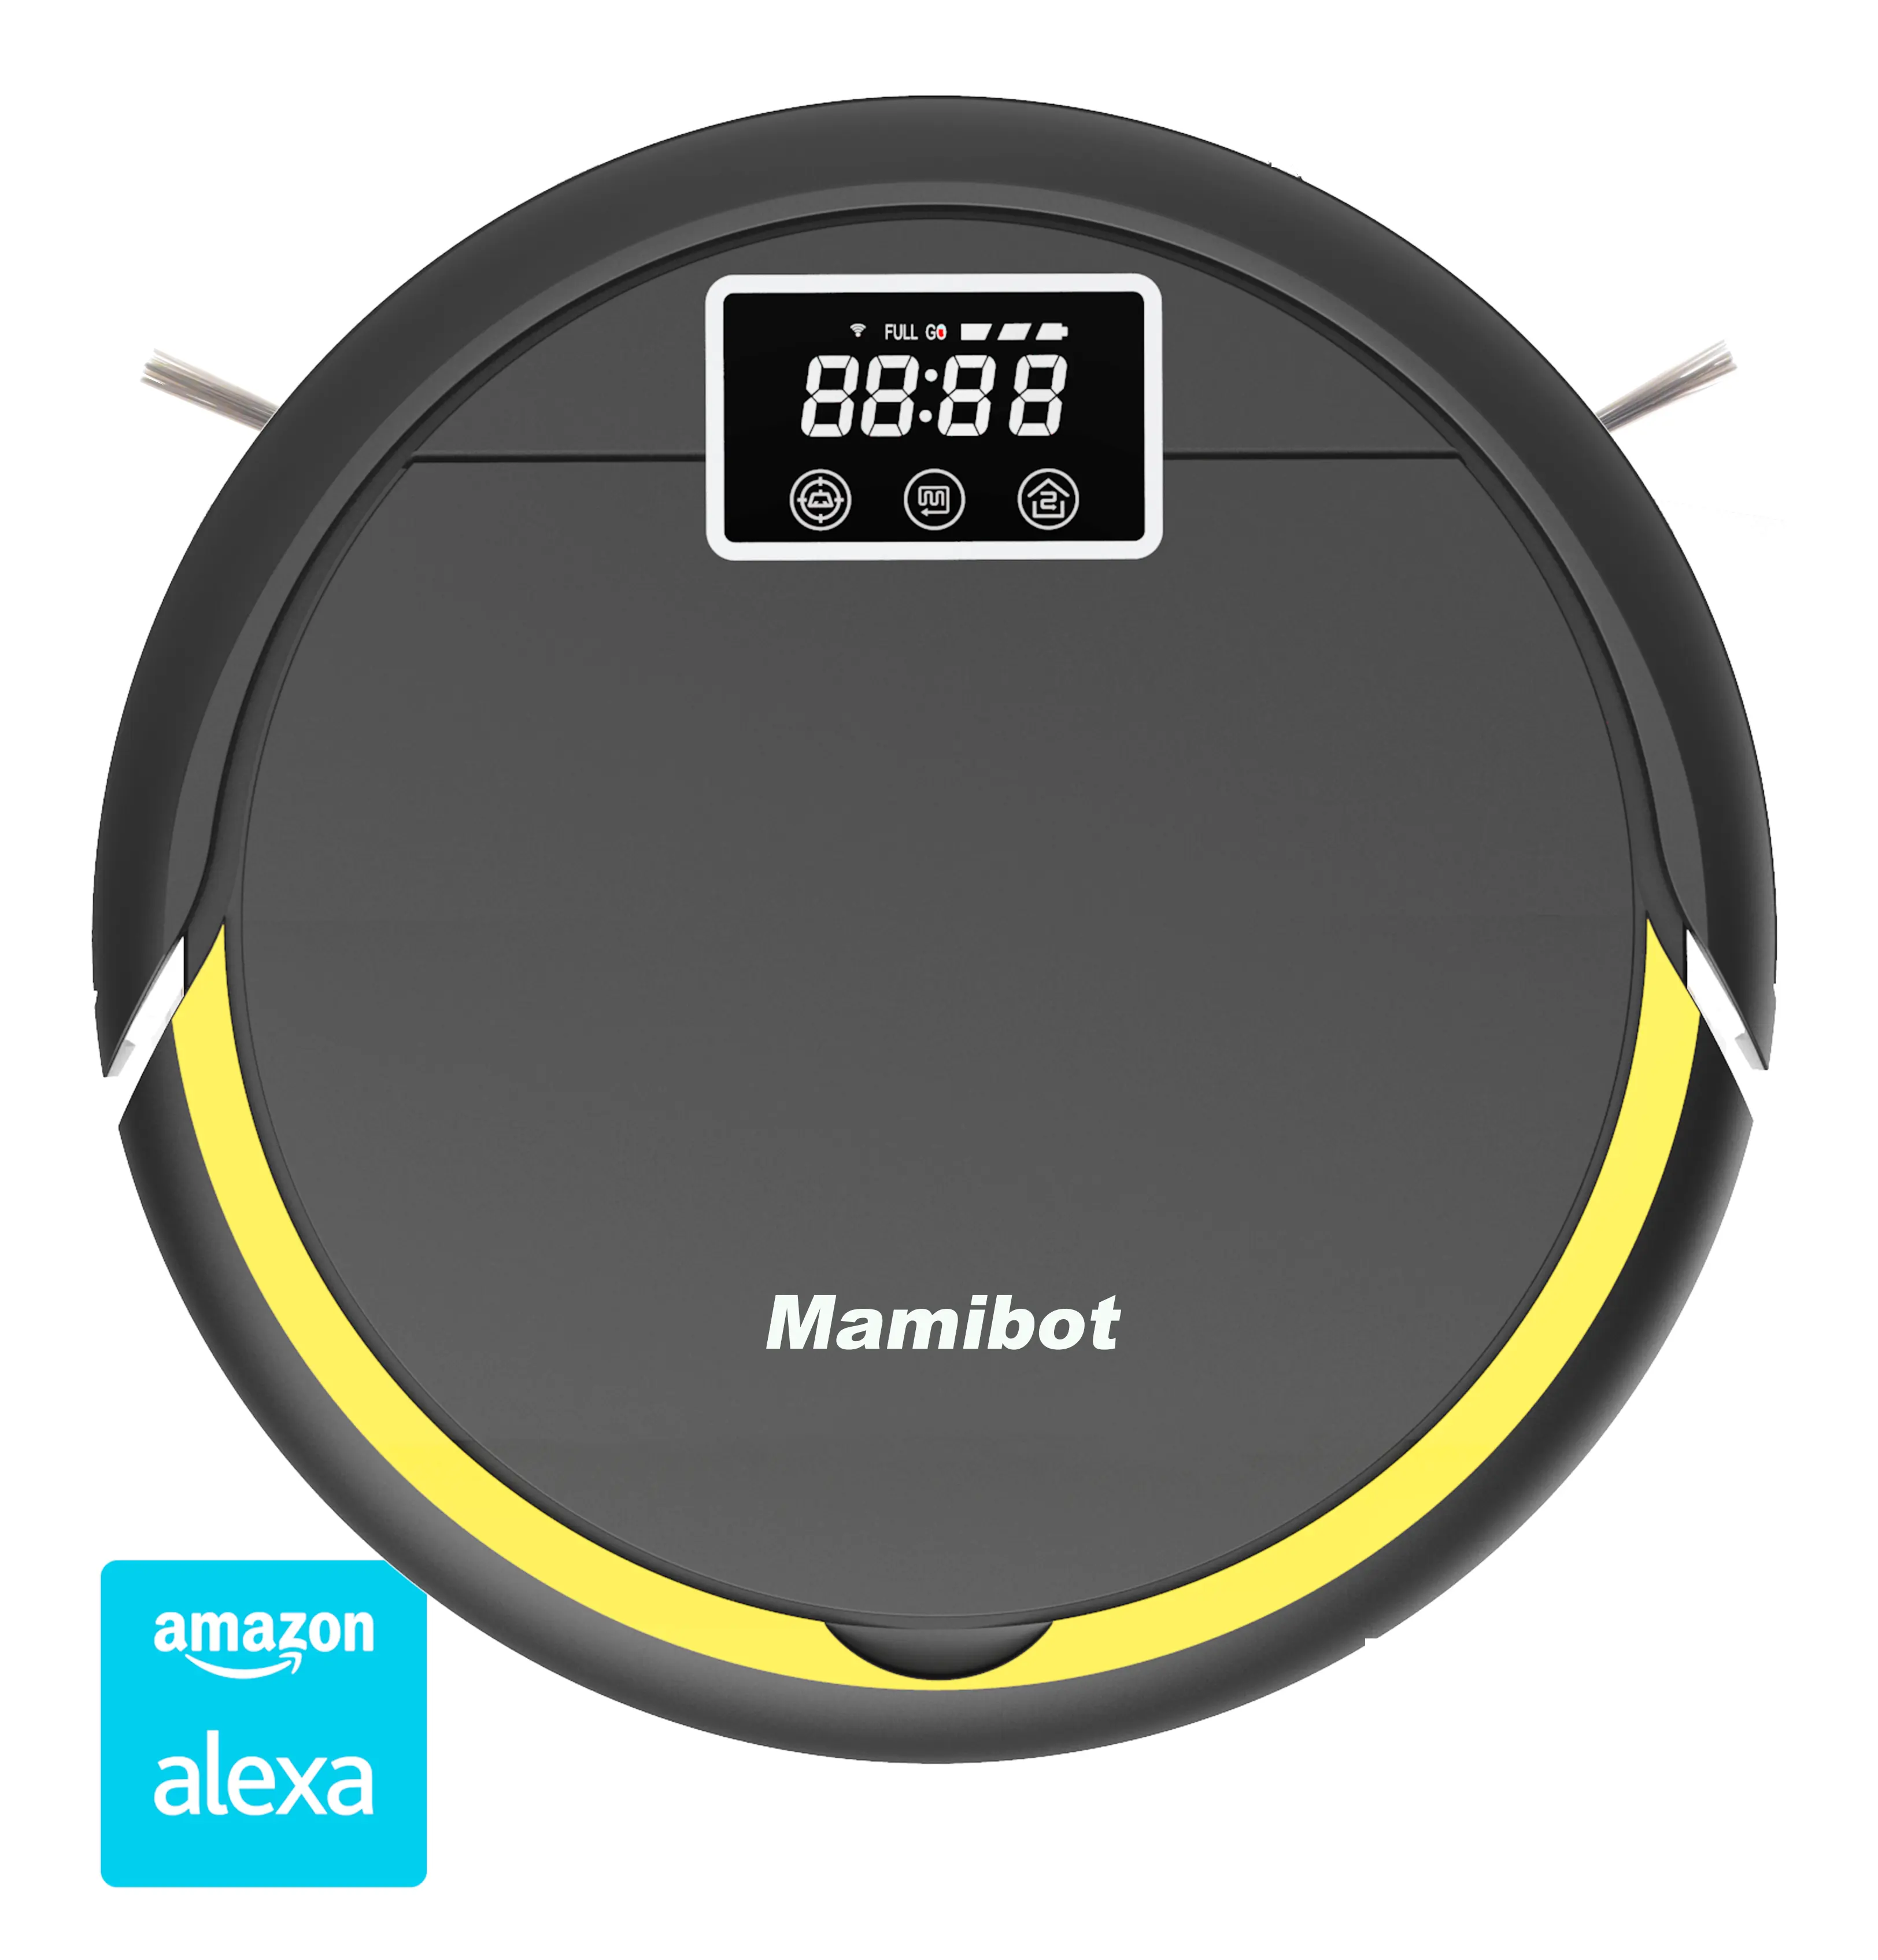 2022 Mamibot Petvac300 superior quality efficient cleaning dry and wet mapping robot vacuum cleaner, wifi control robotic vacuum